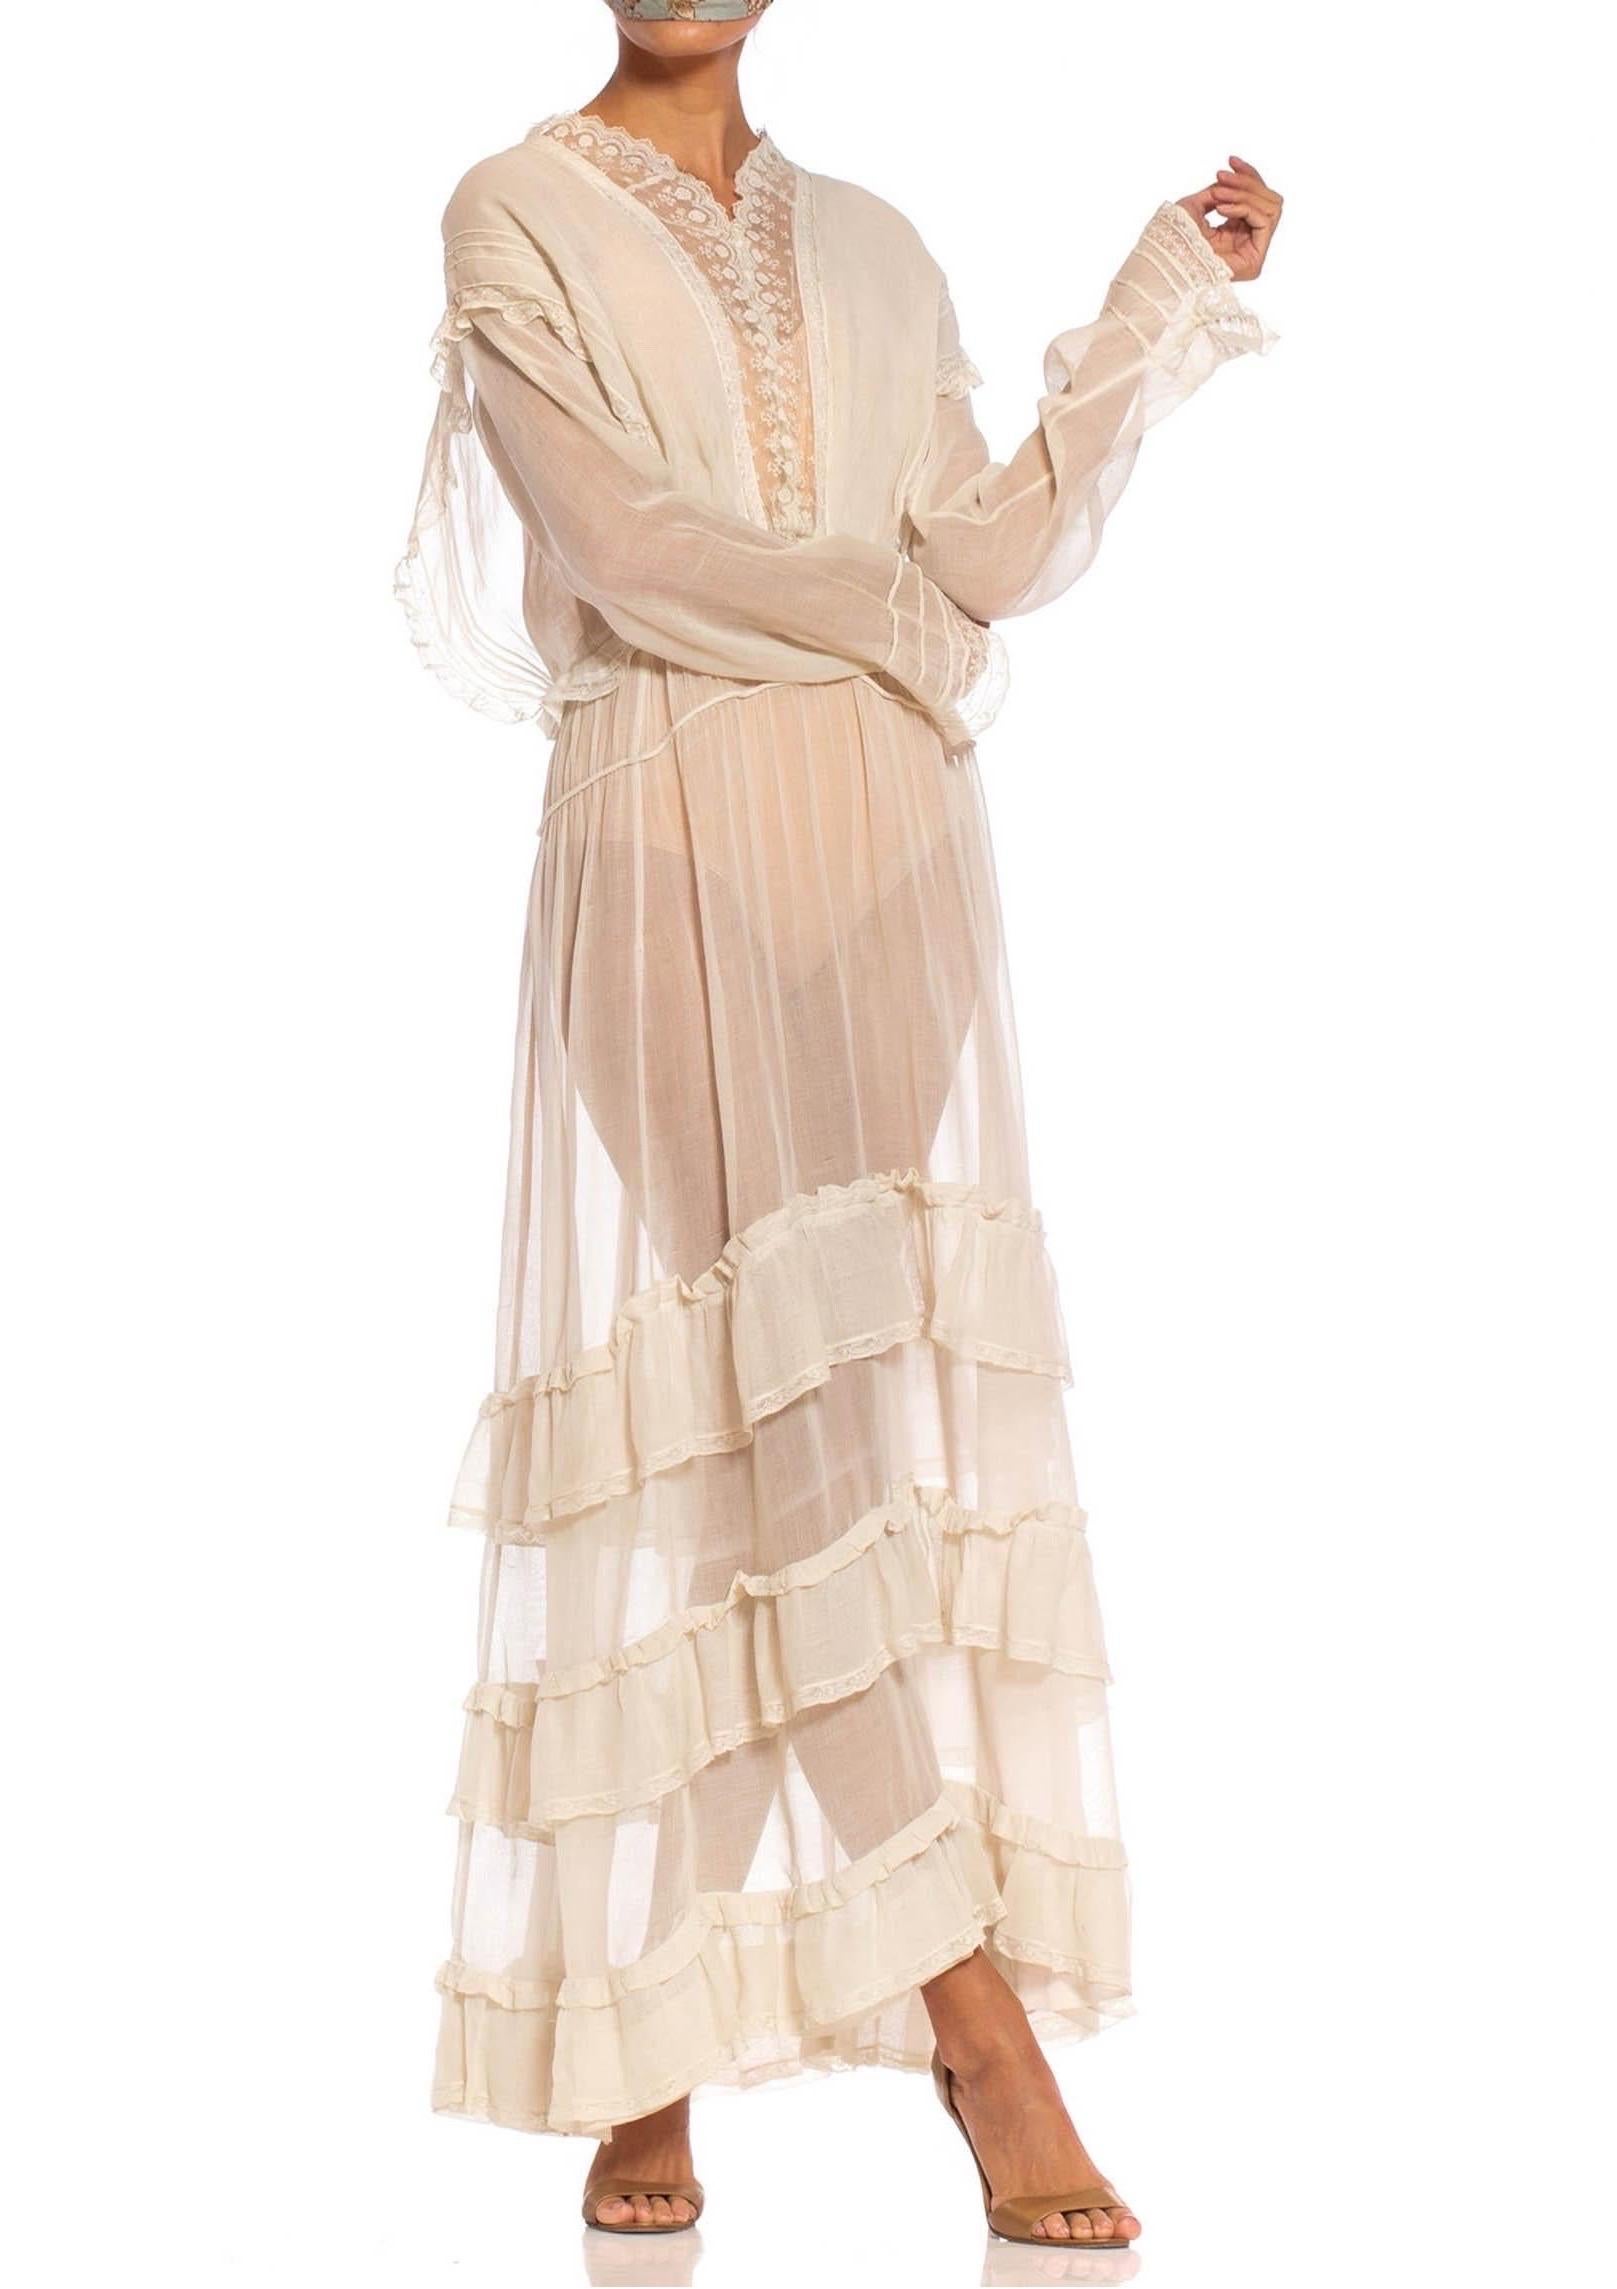 Edwardian Off White Organic Cotton Voile & Lace Long Sleeved Ruffled Tea Dress For Sale 1